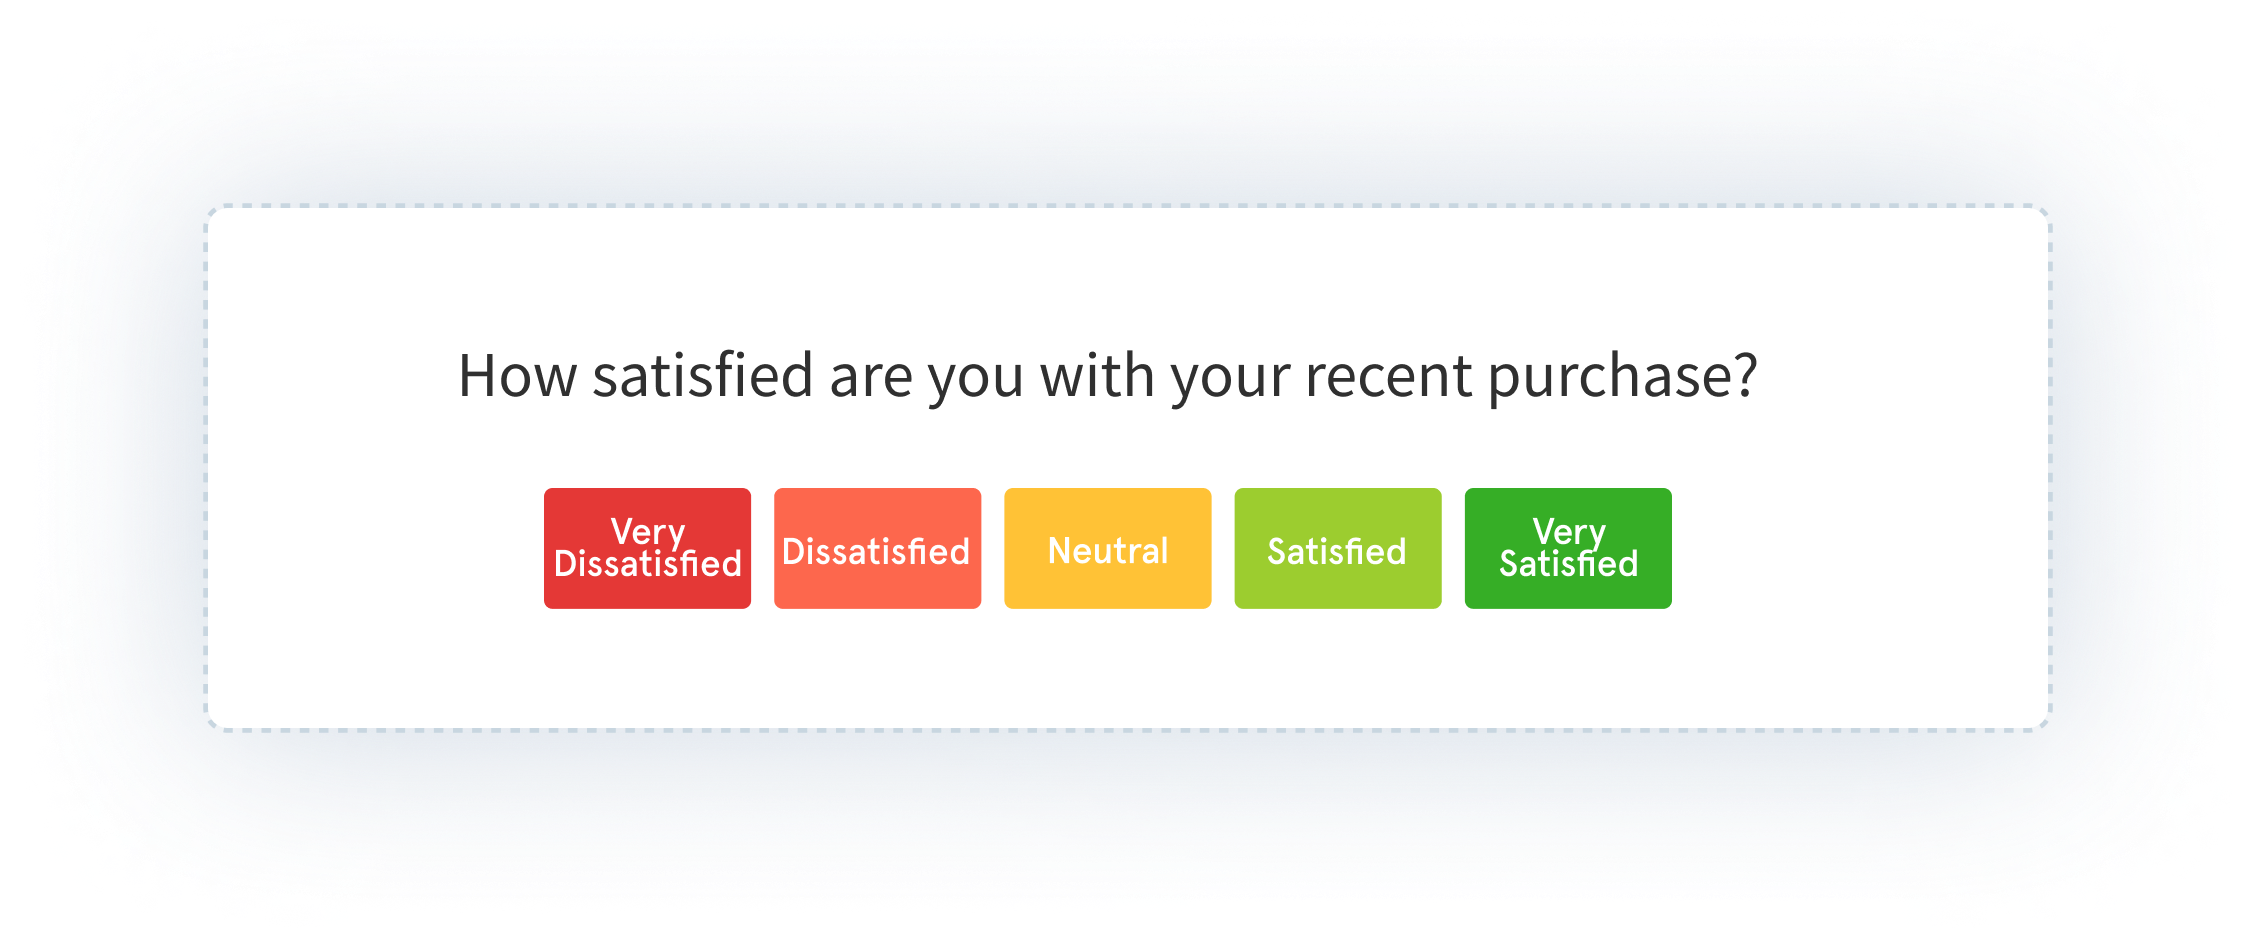 how satisfied are you with your reent purchase